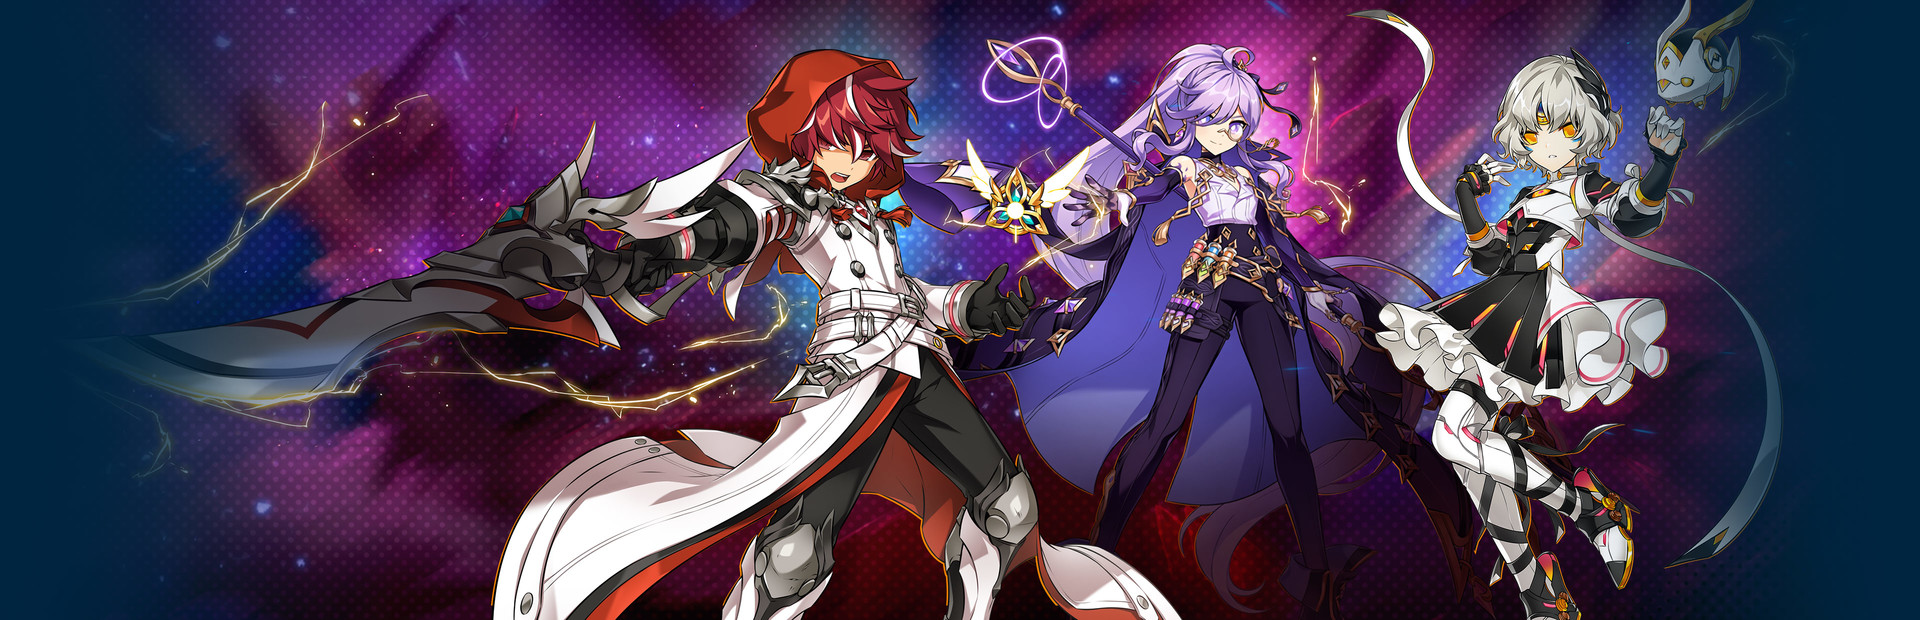 Elsword Free-to-Play cover image